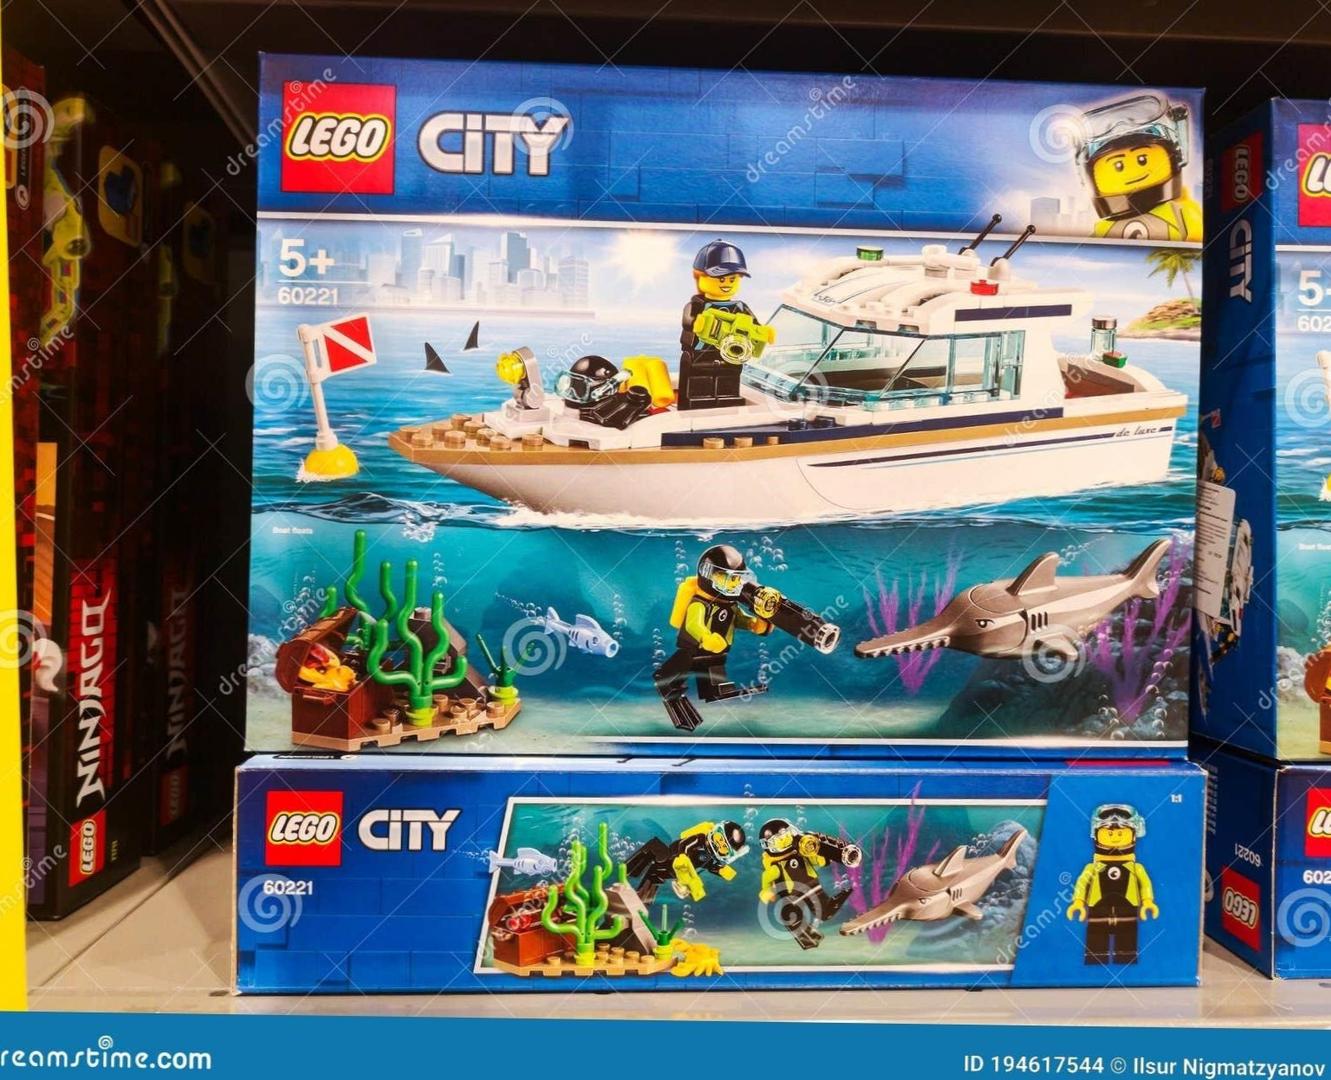 Unleash Your Imagination with the Diving Yacht LEGO Set